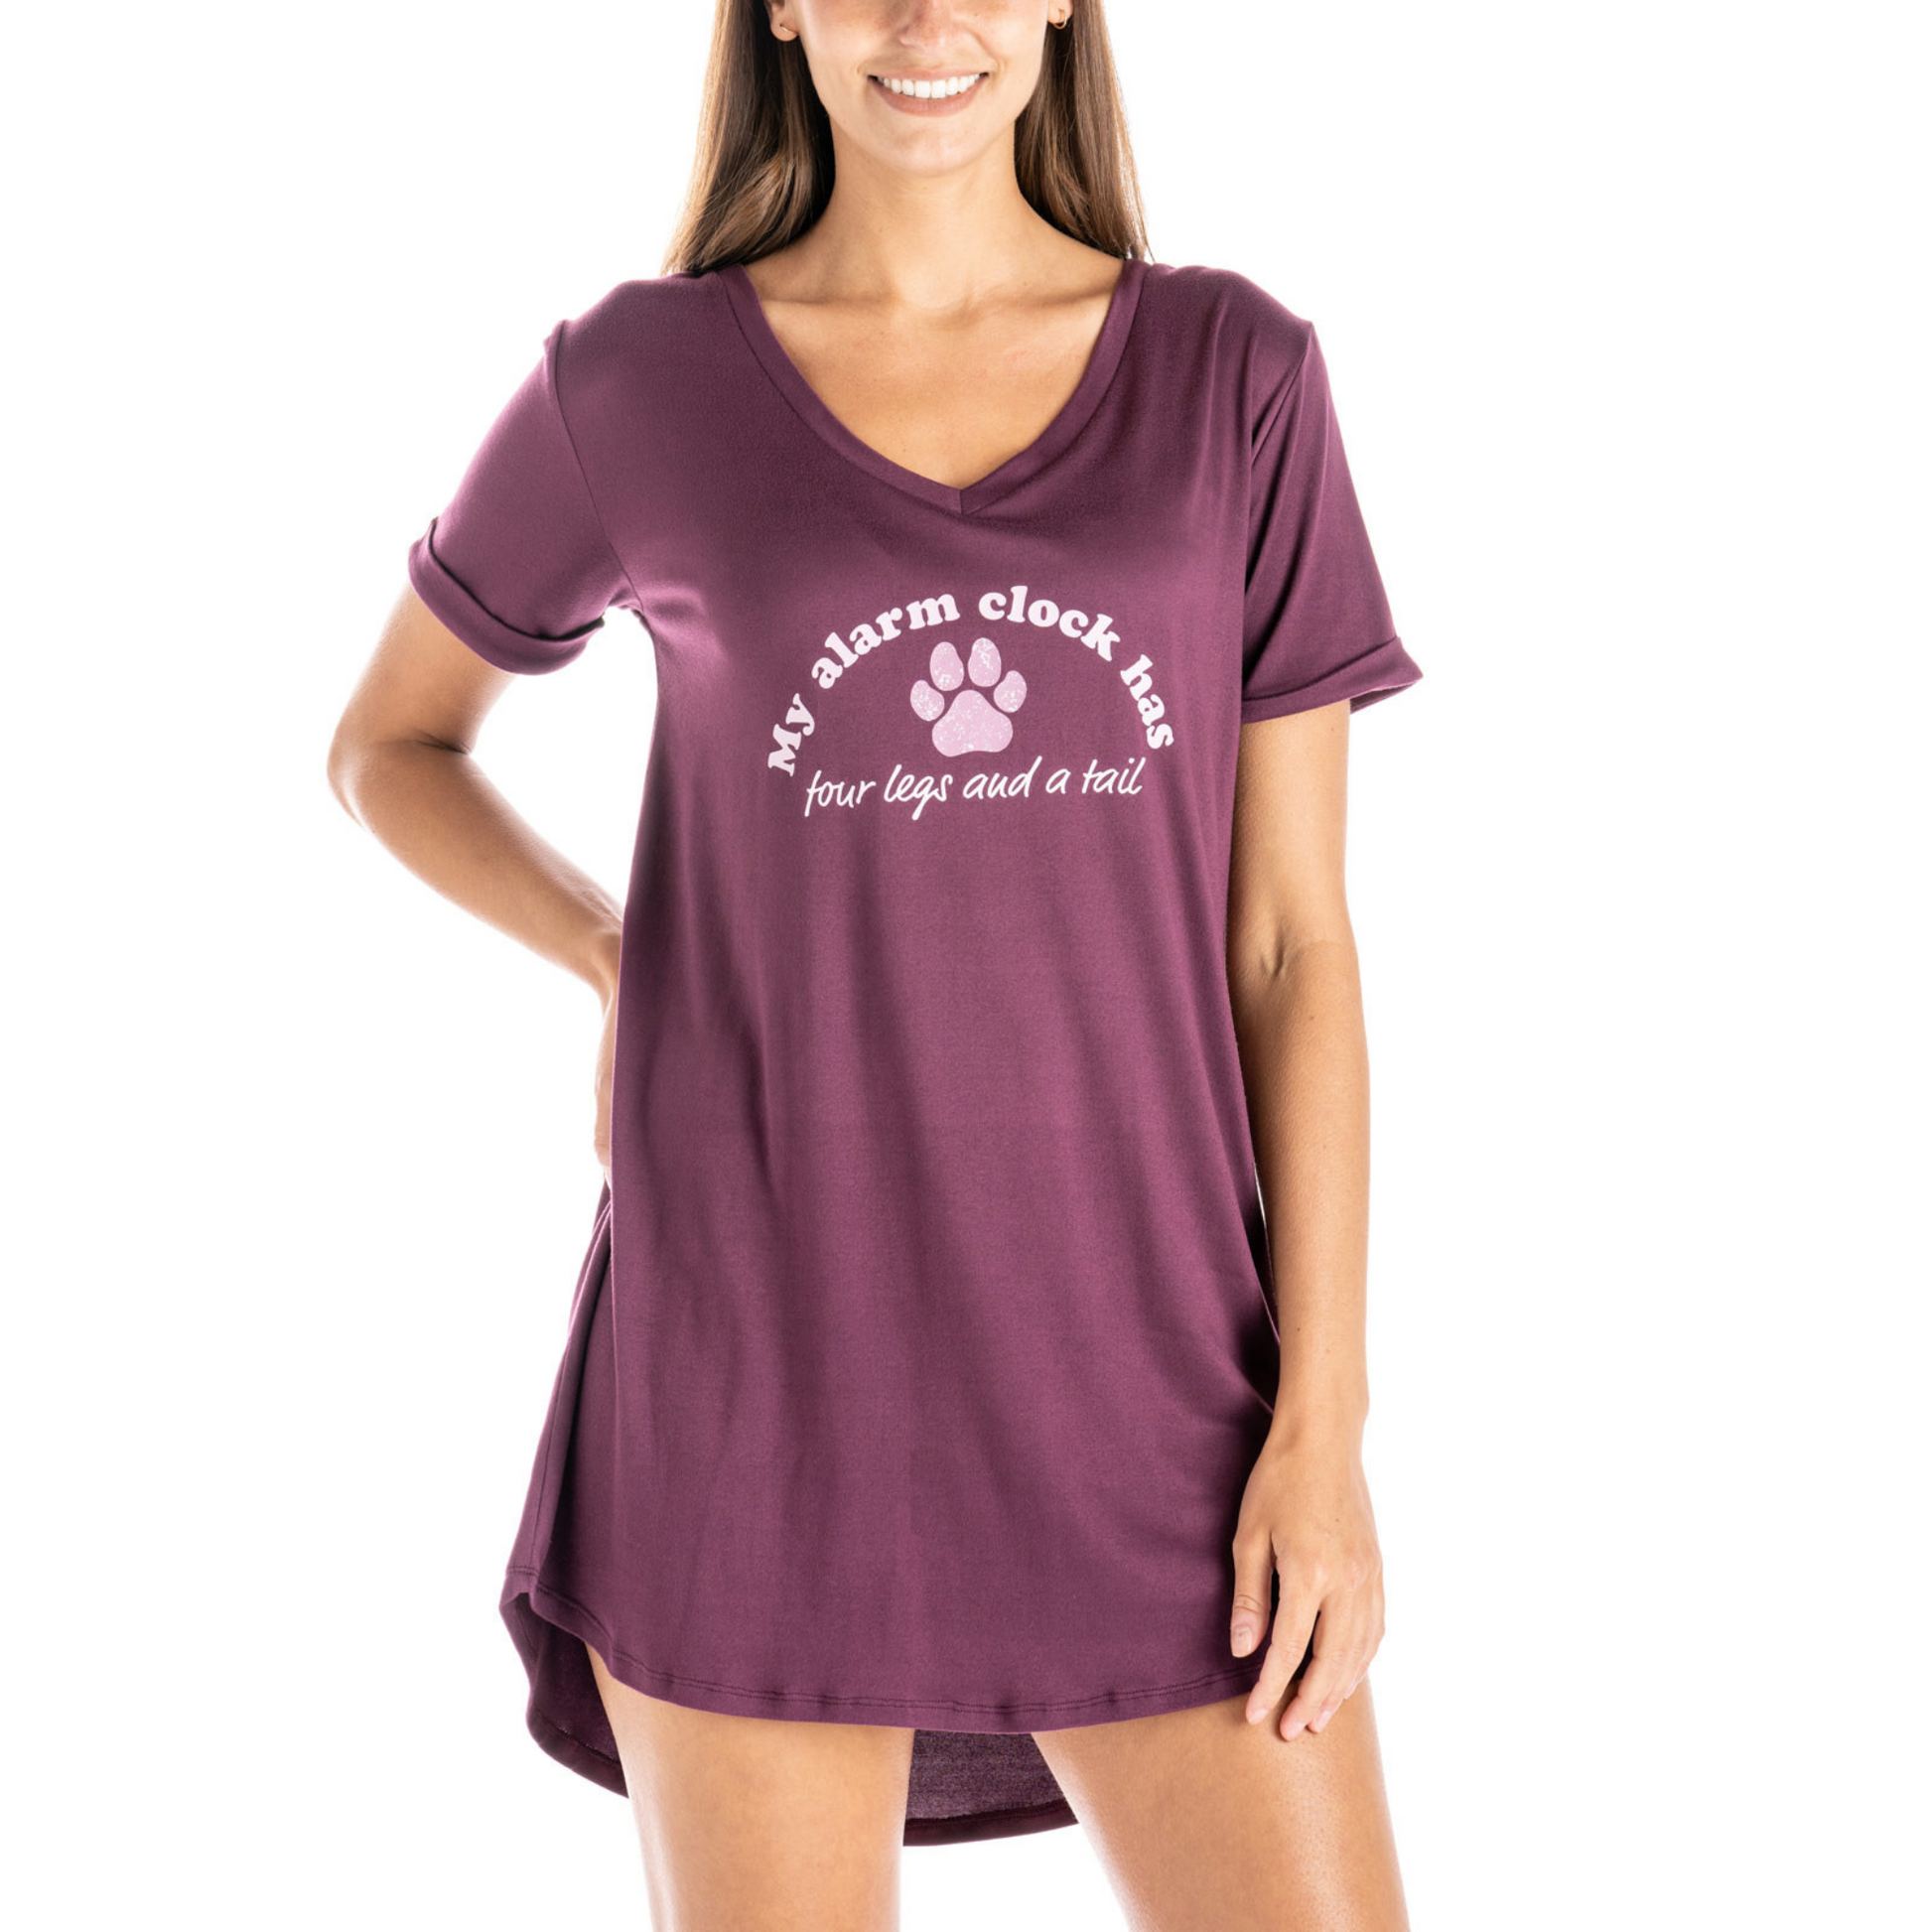 "My alarm clock has four legs and a tail" super soft maroon colored sleepshirt